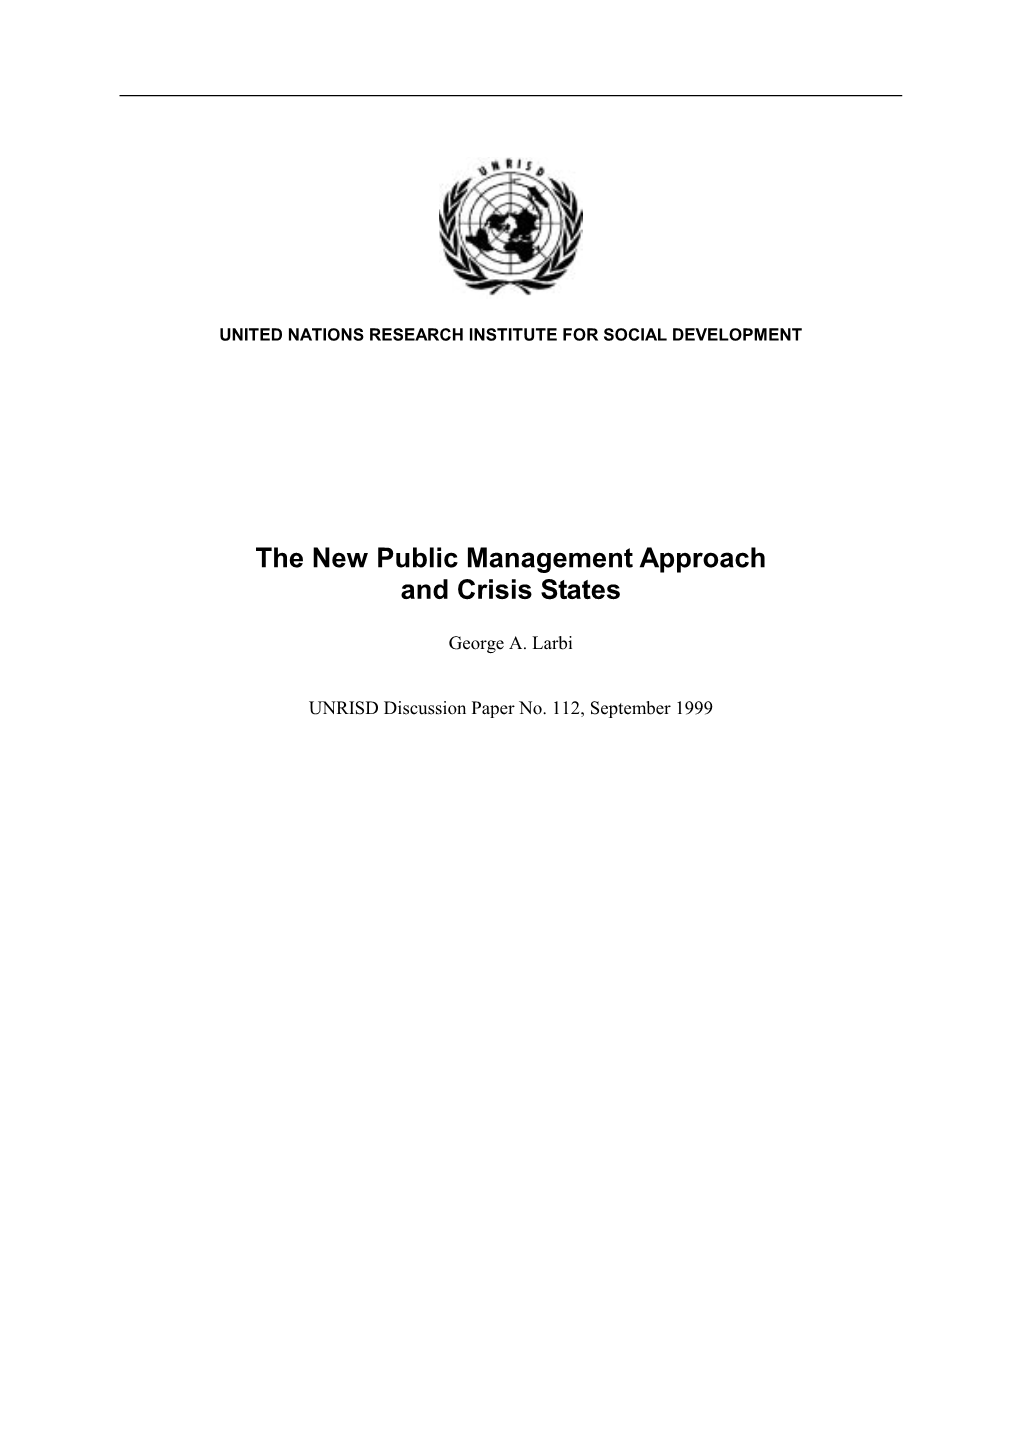 The New Public Management Approach and Crisis States